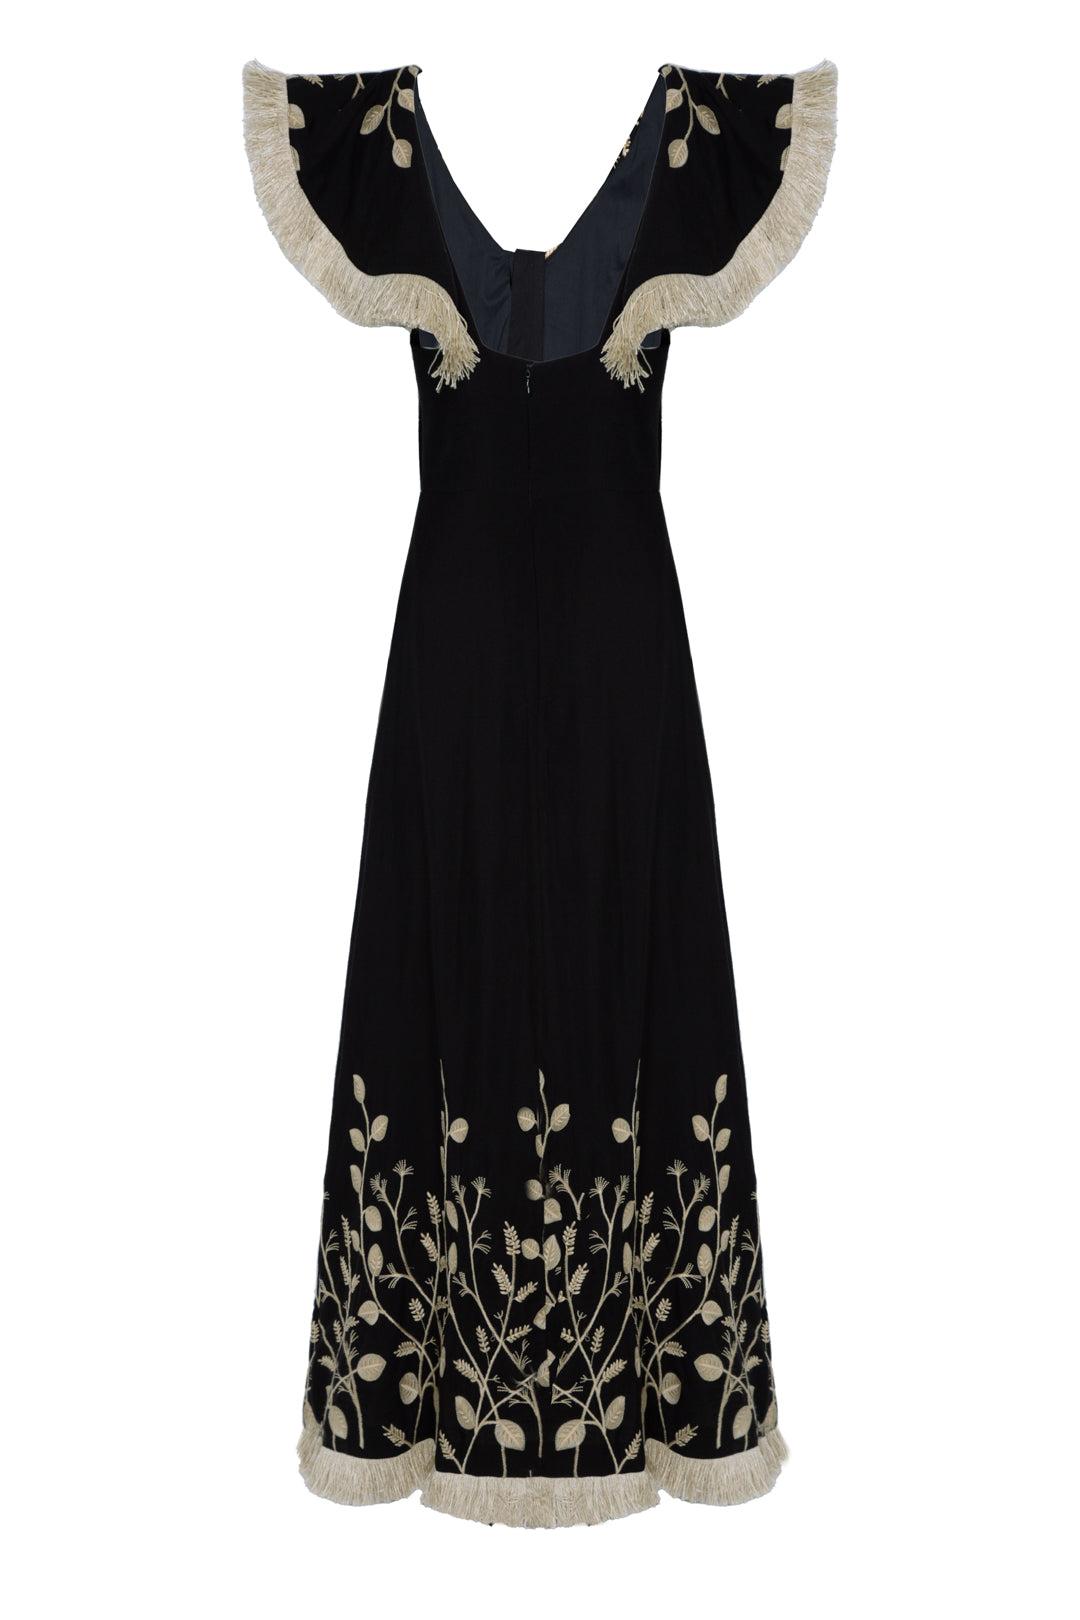 NALA BLACK DRESS WITH EMBROIDERED FLOWERS.